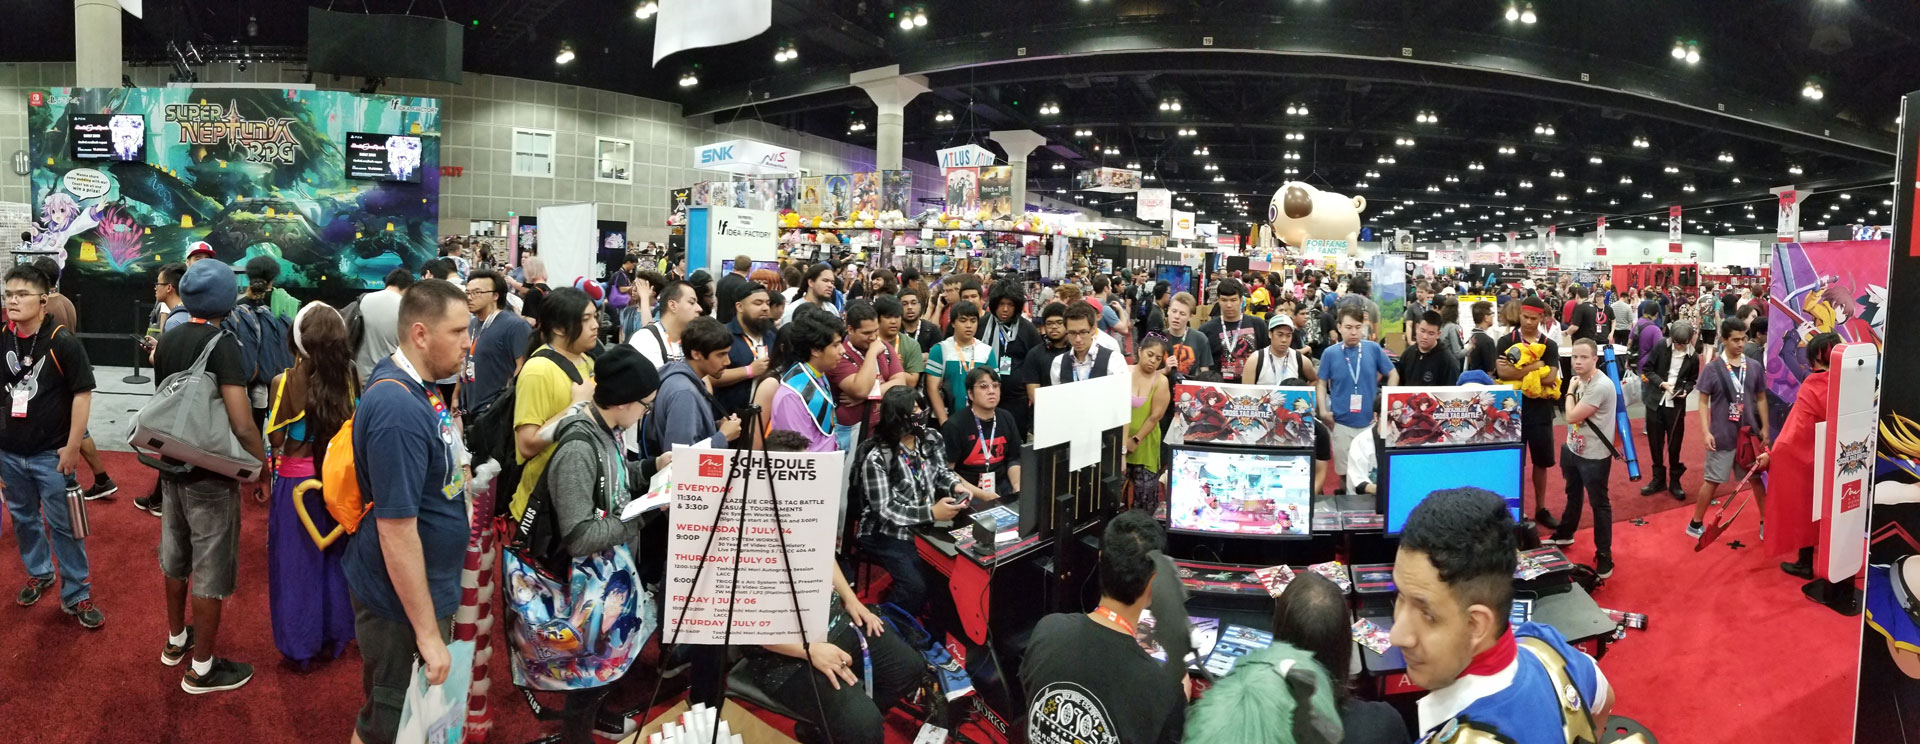 Arc System Works at Anime Expo 2019